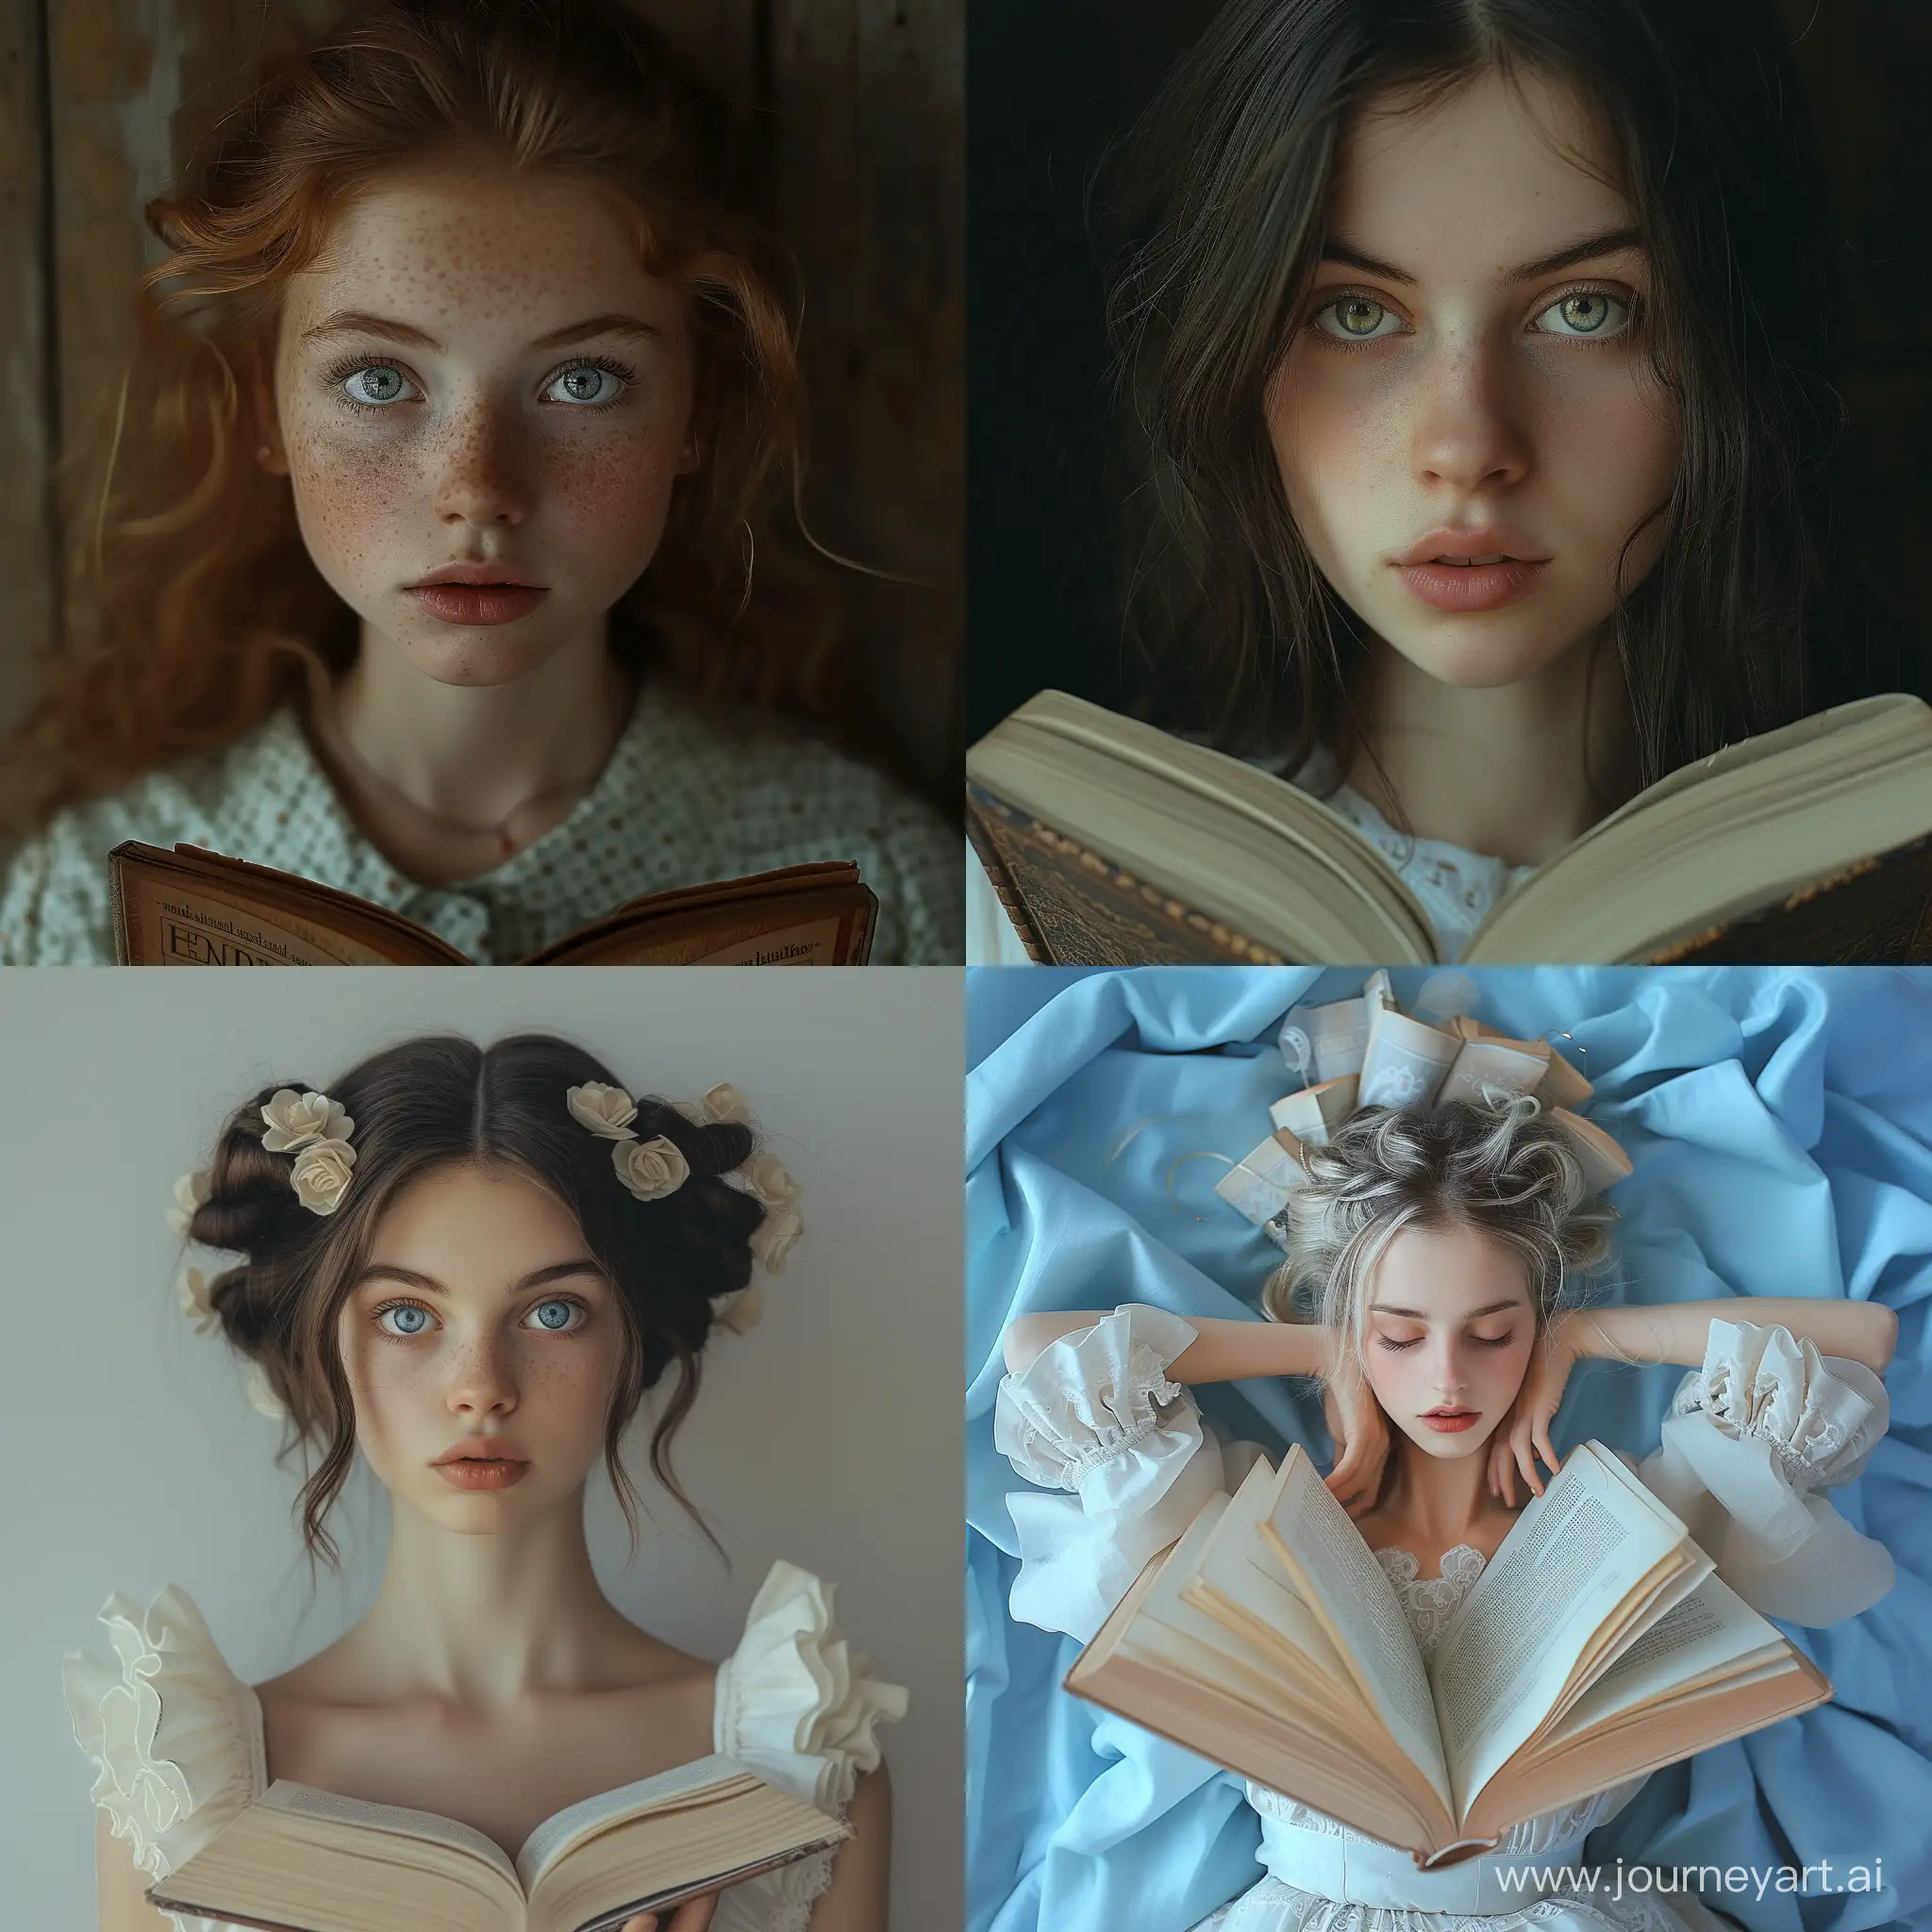 Photorealistic-Bookstagrammer-Girl-in-Artful-Photography